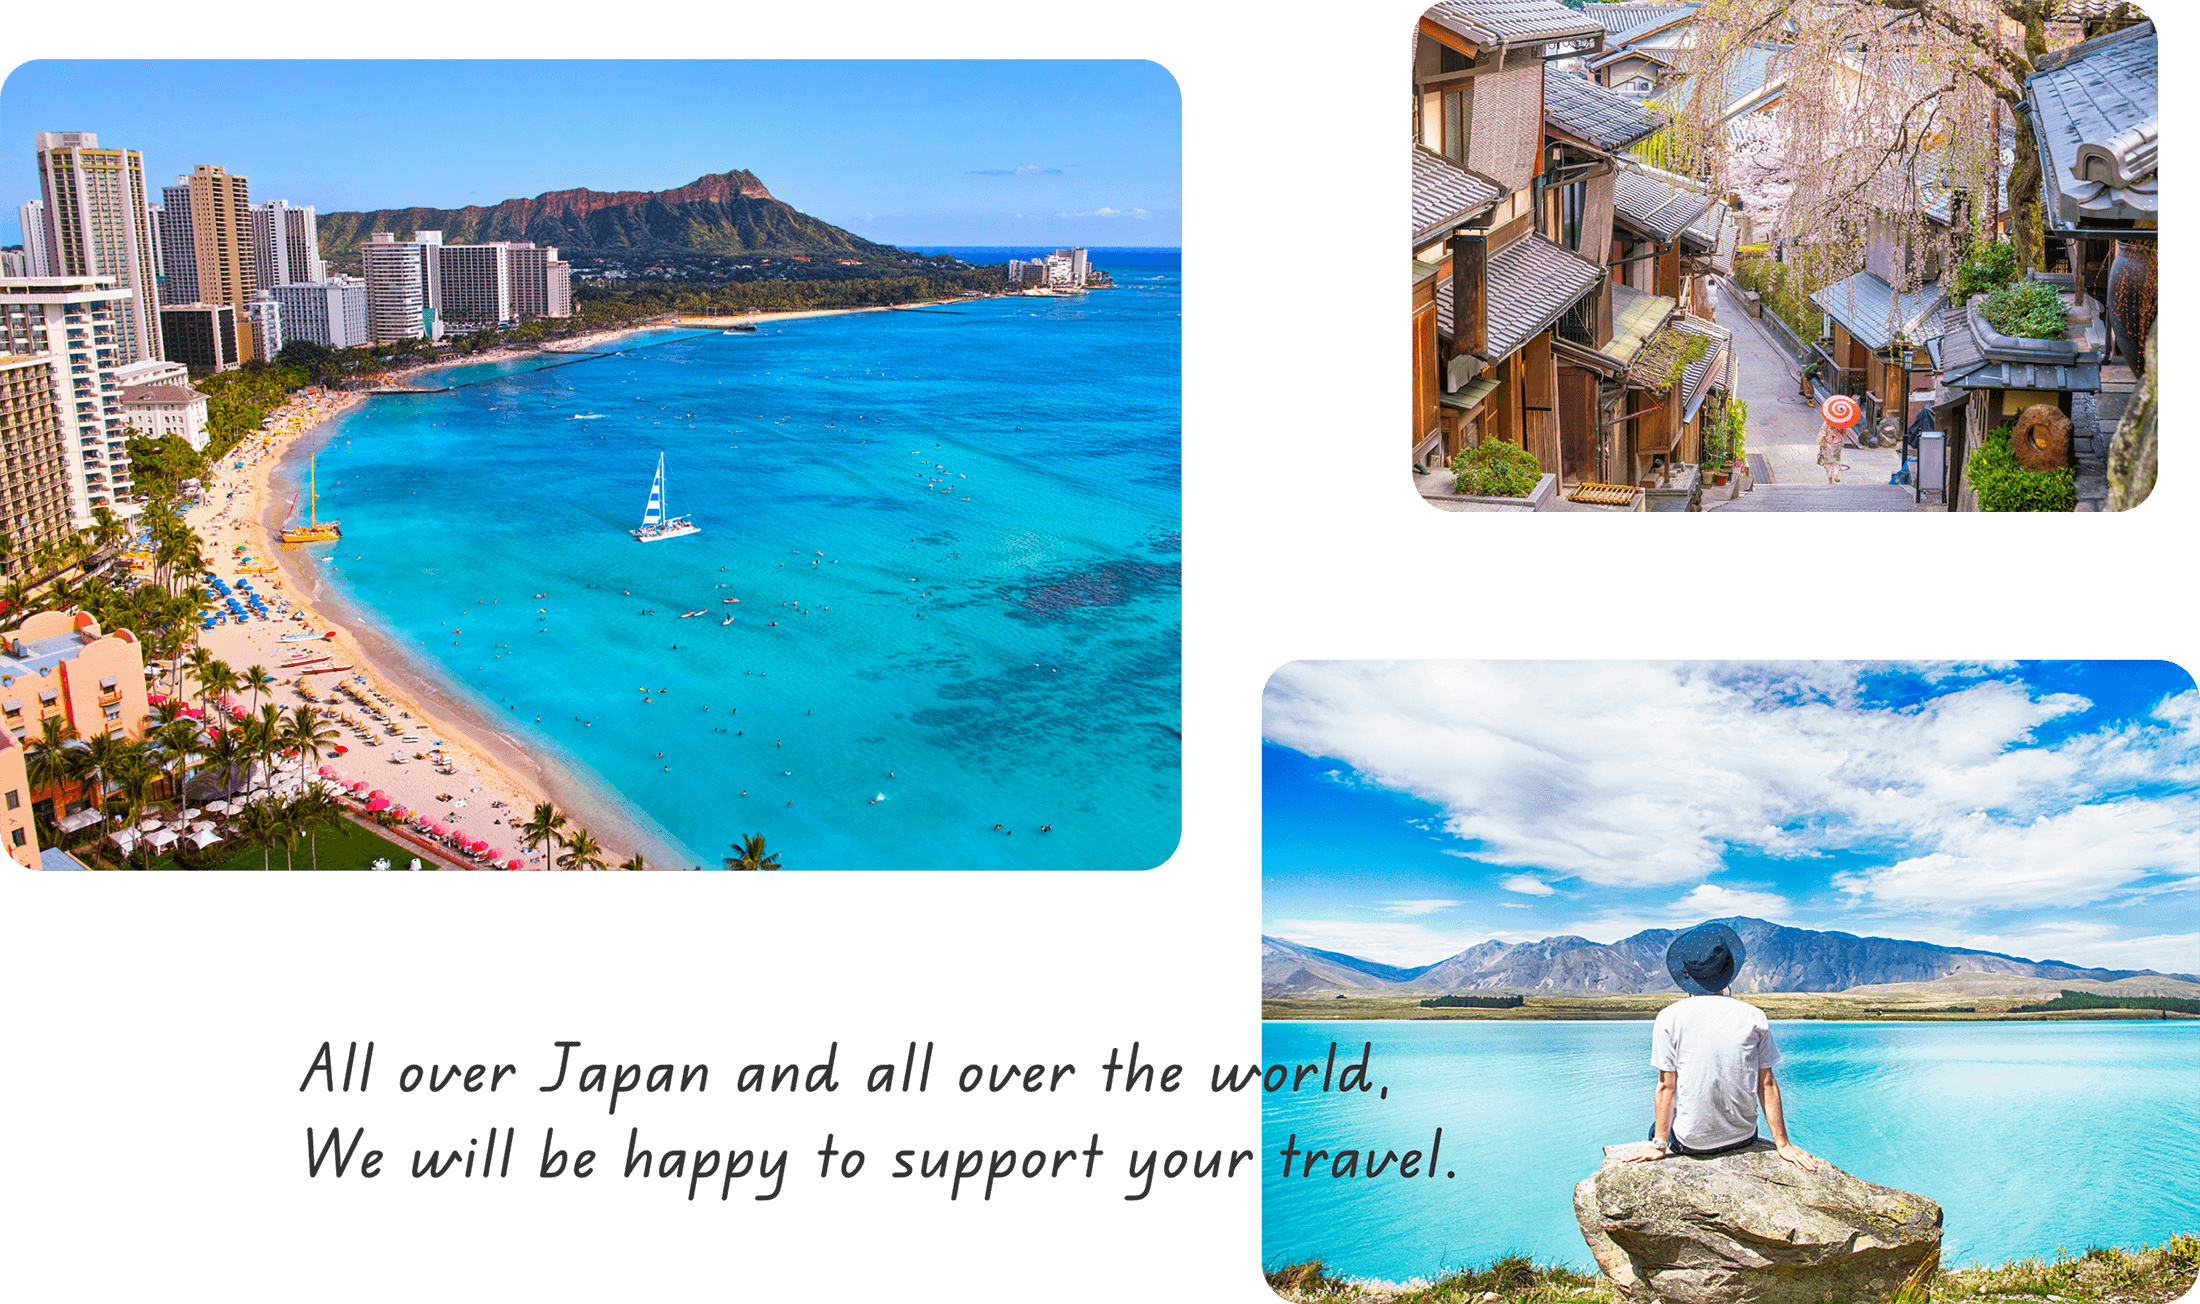 We support your travel throughout Japan and around the world.